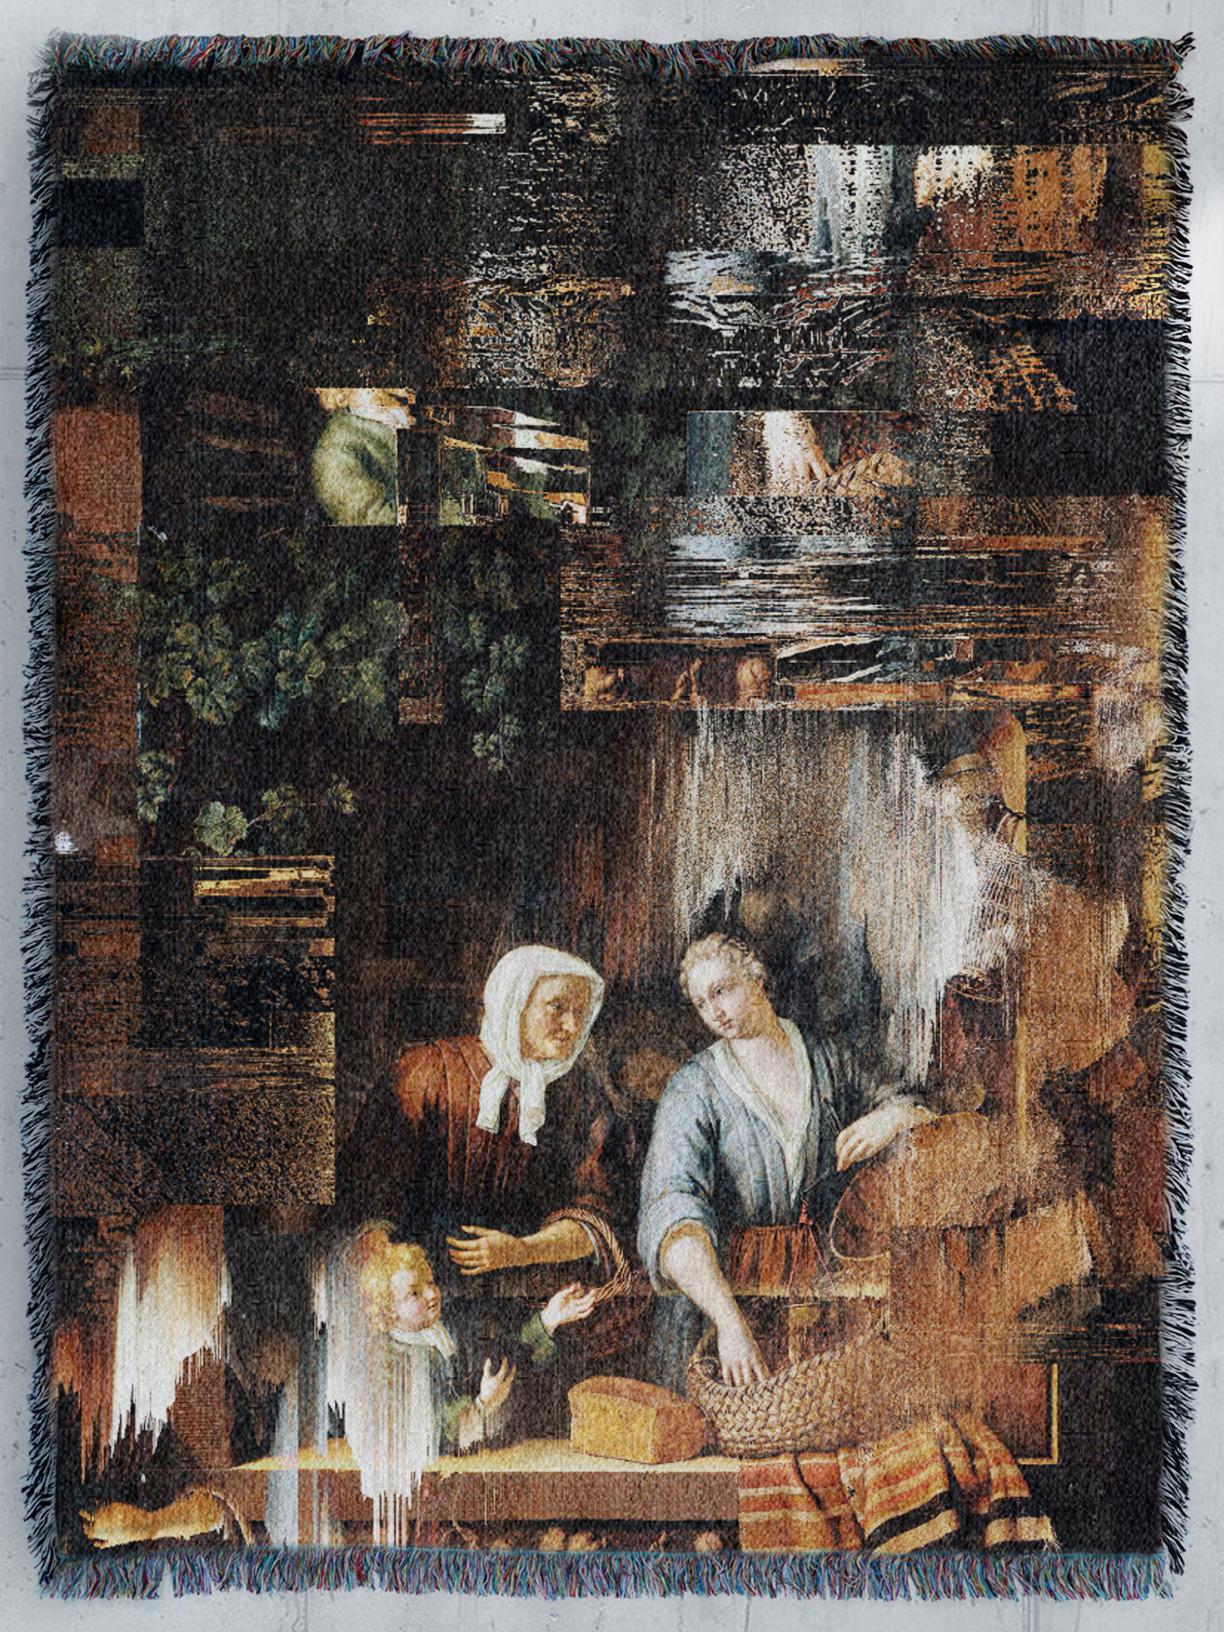 Memories of “The Grocer's Shop” by Frans van Mieris by Marco Salvi - Print by Unknown